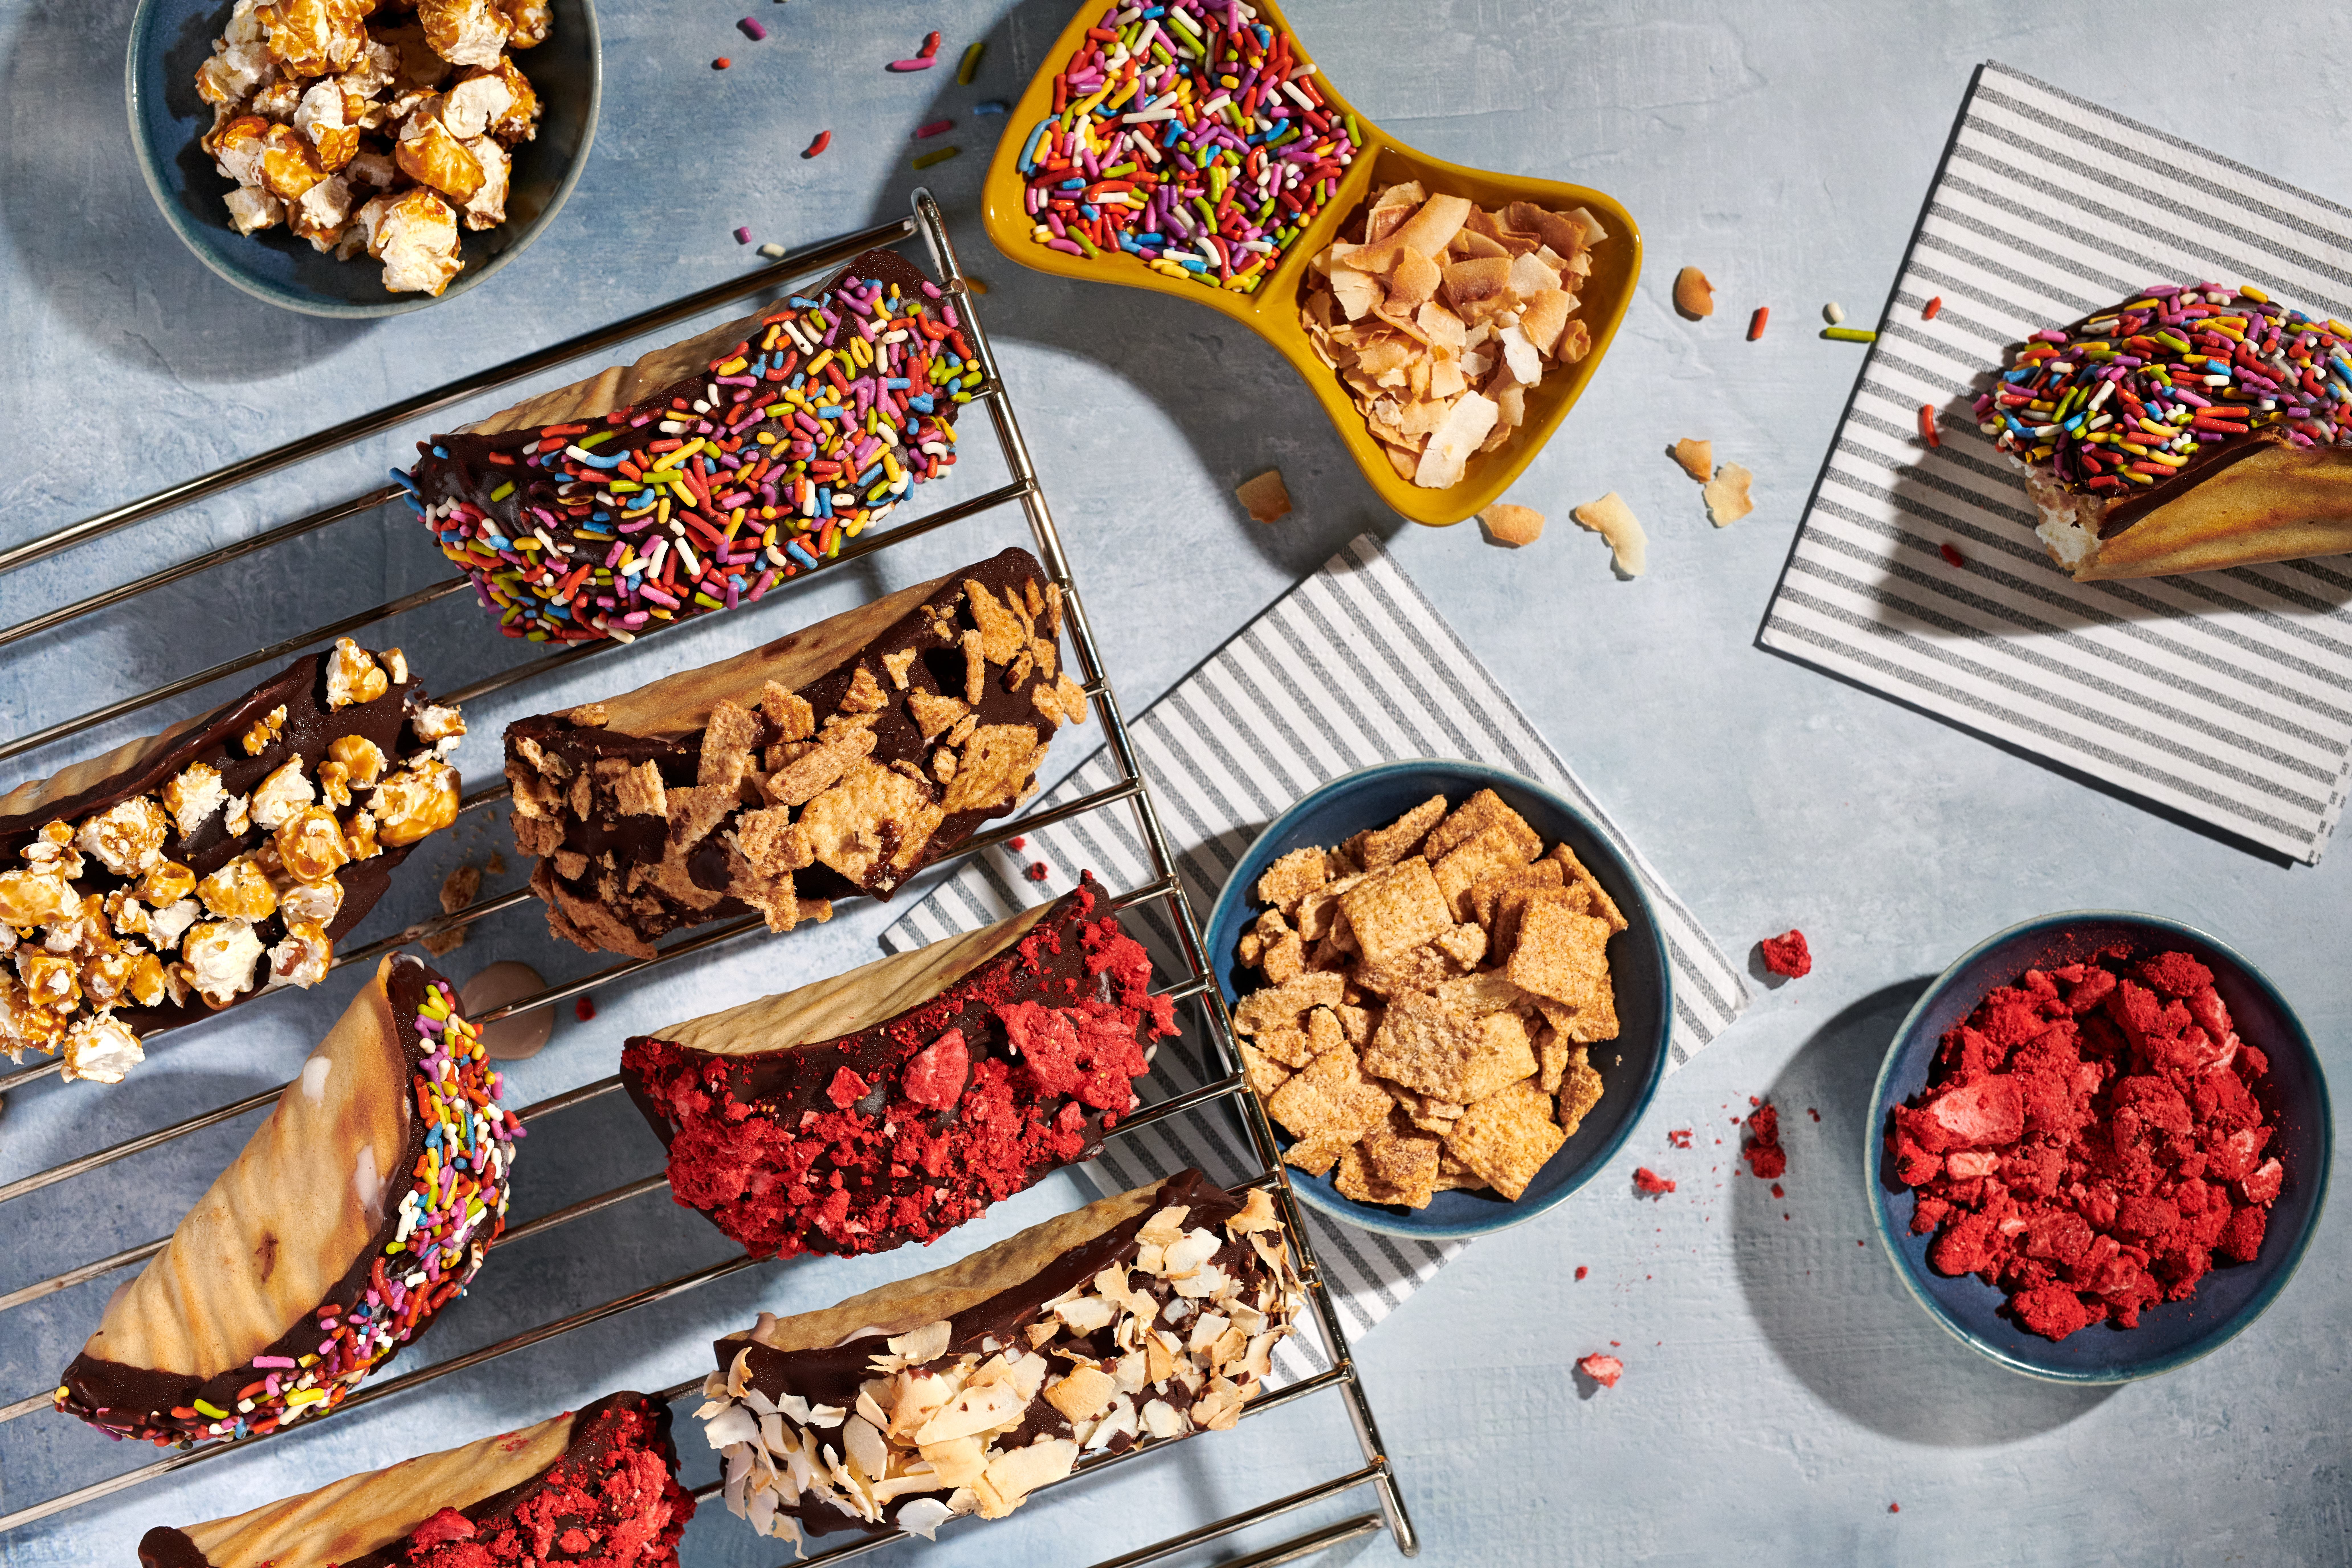 An array of ice cream tacos, covered in colorful toppings.